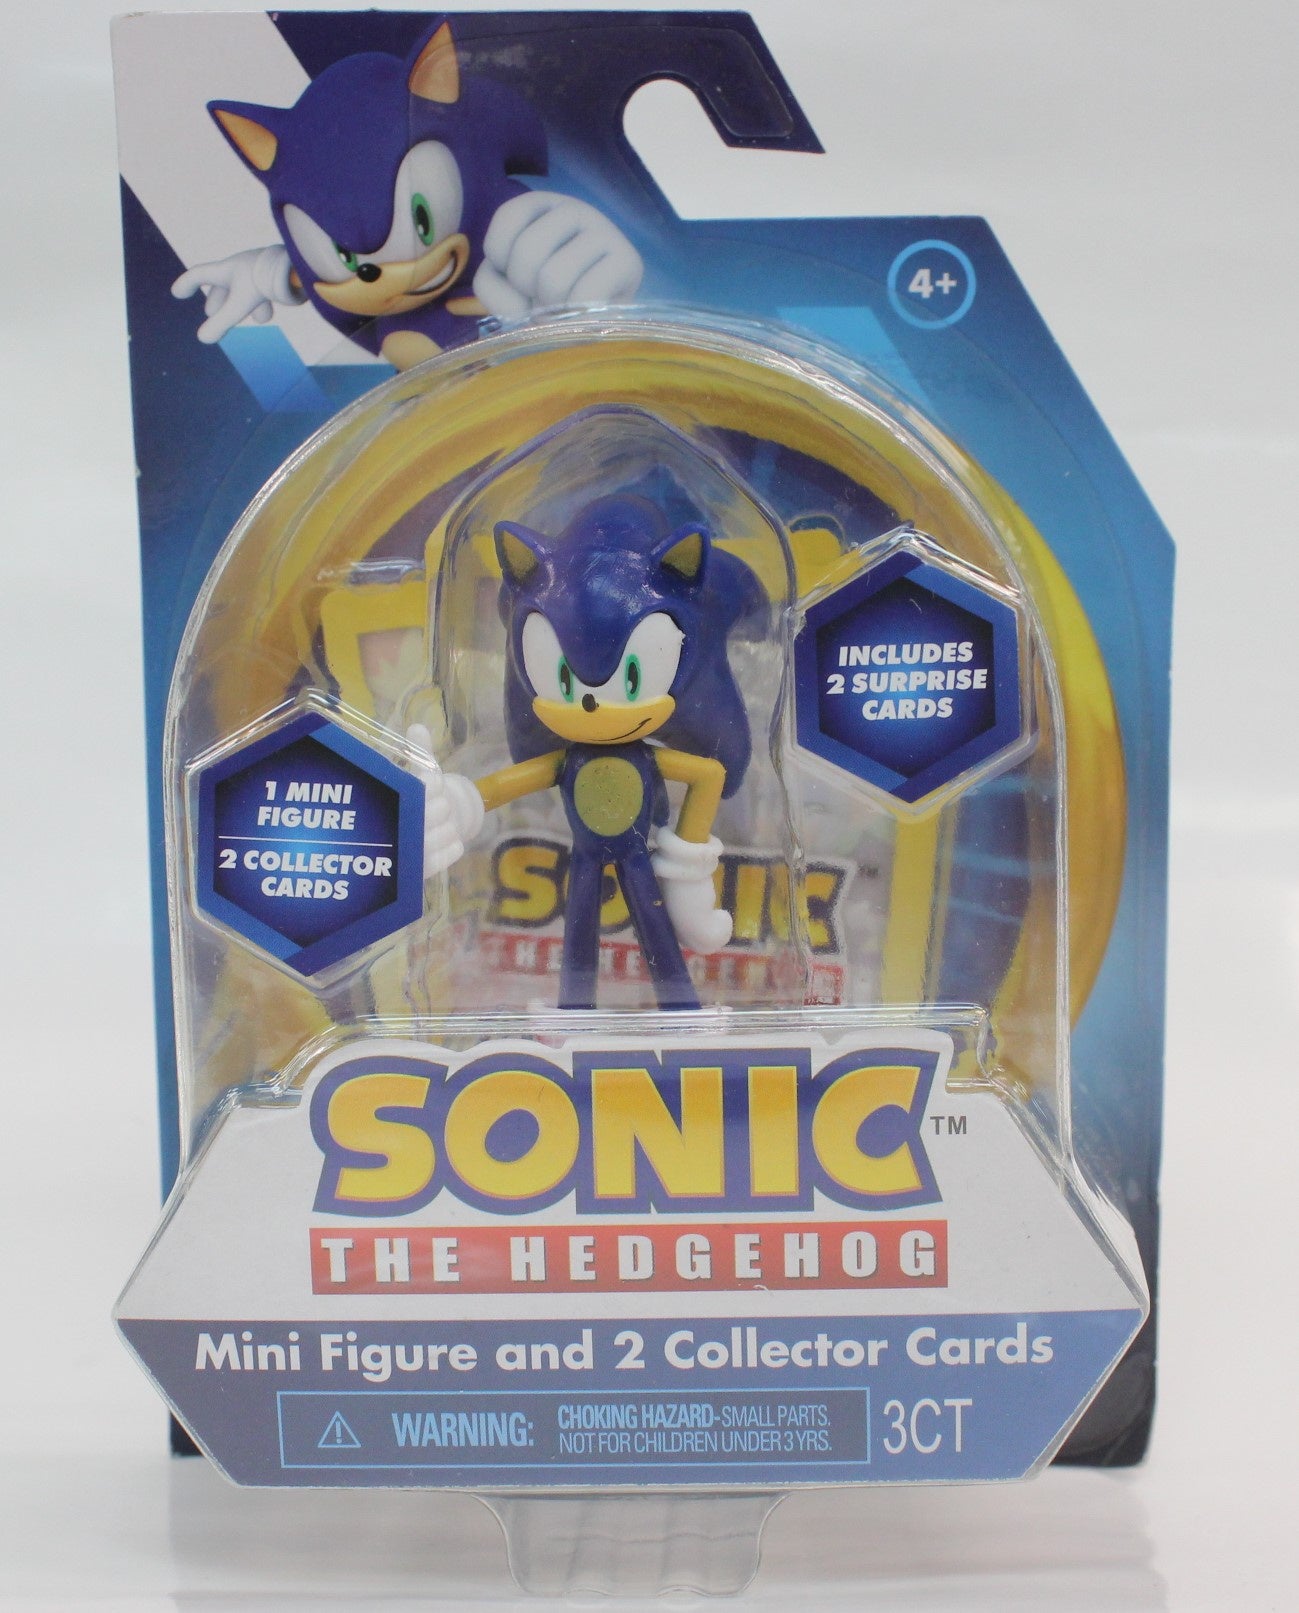 Sonic The Hedgehog Mini Figure 2.5” and 2 Collector Cards - Sonic